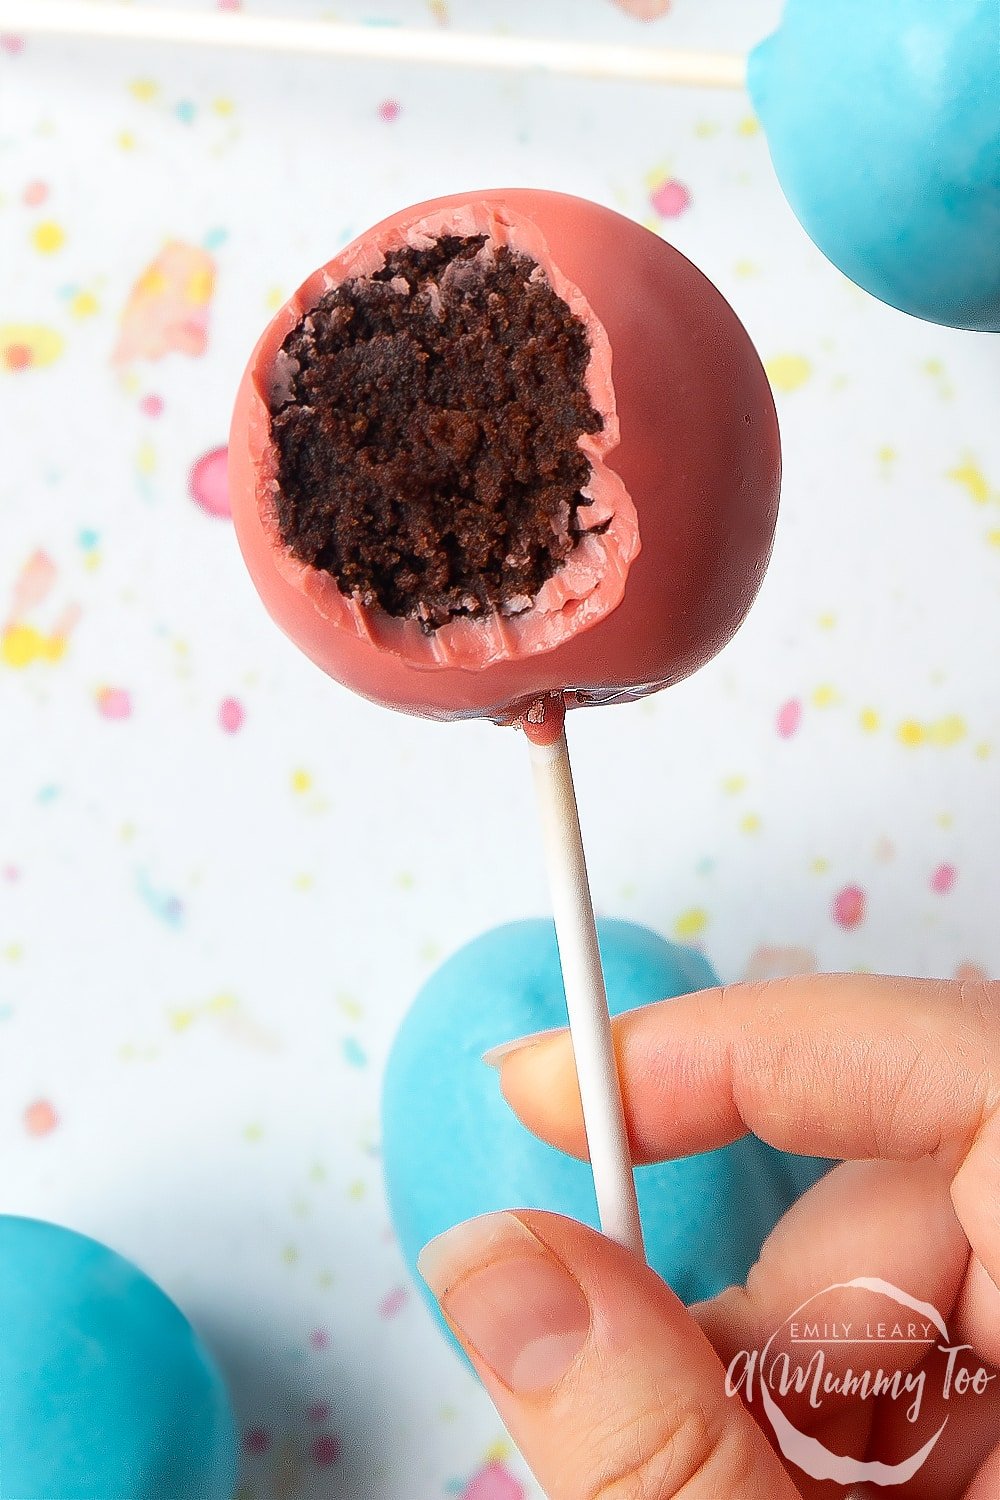 Inside one of these delicious chocolate cake pops